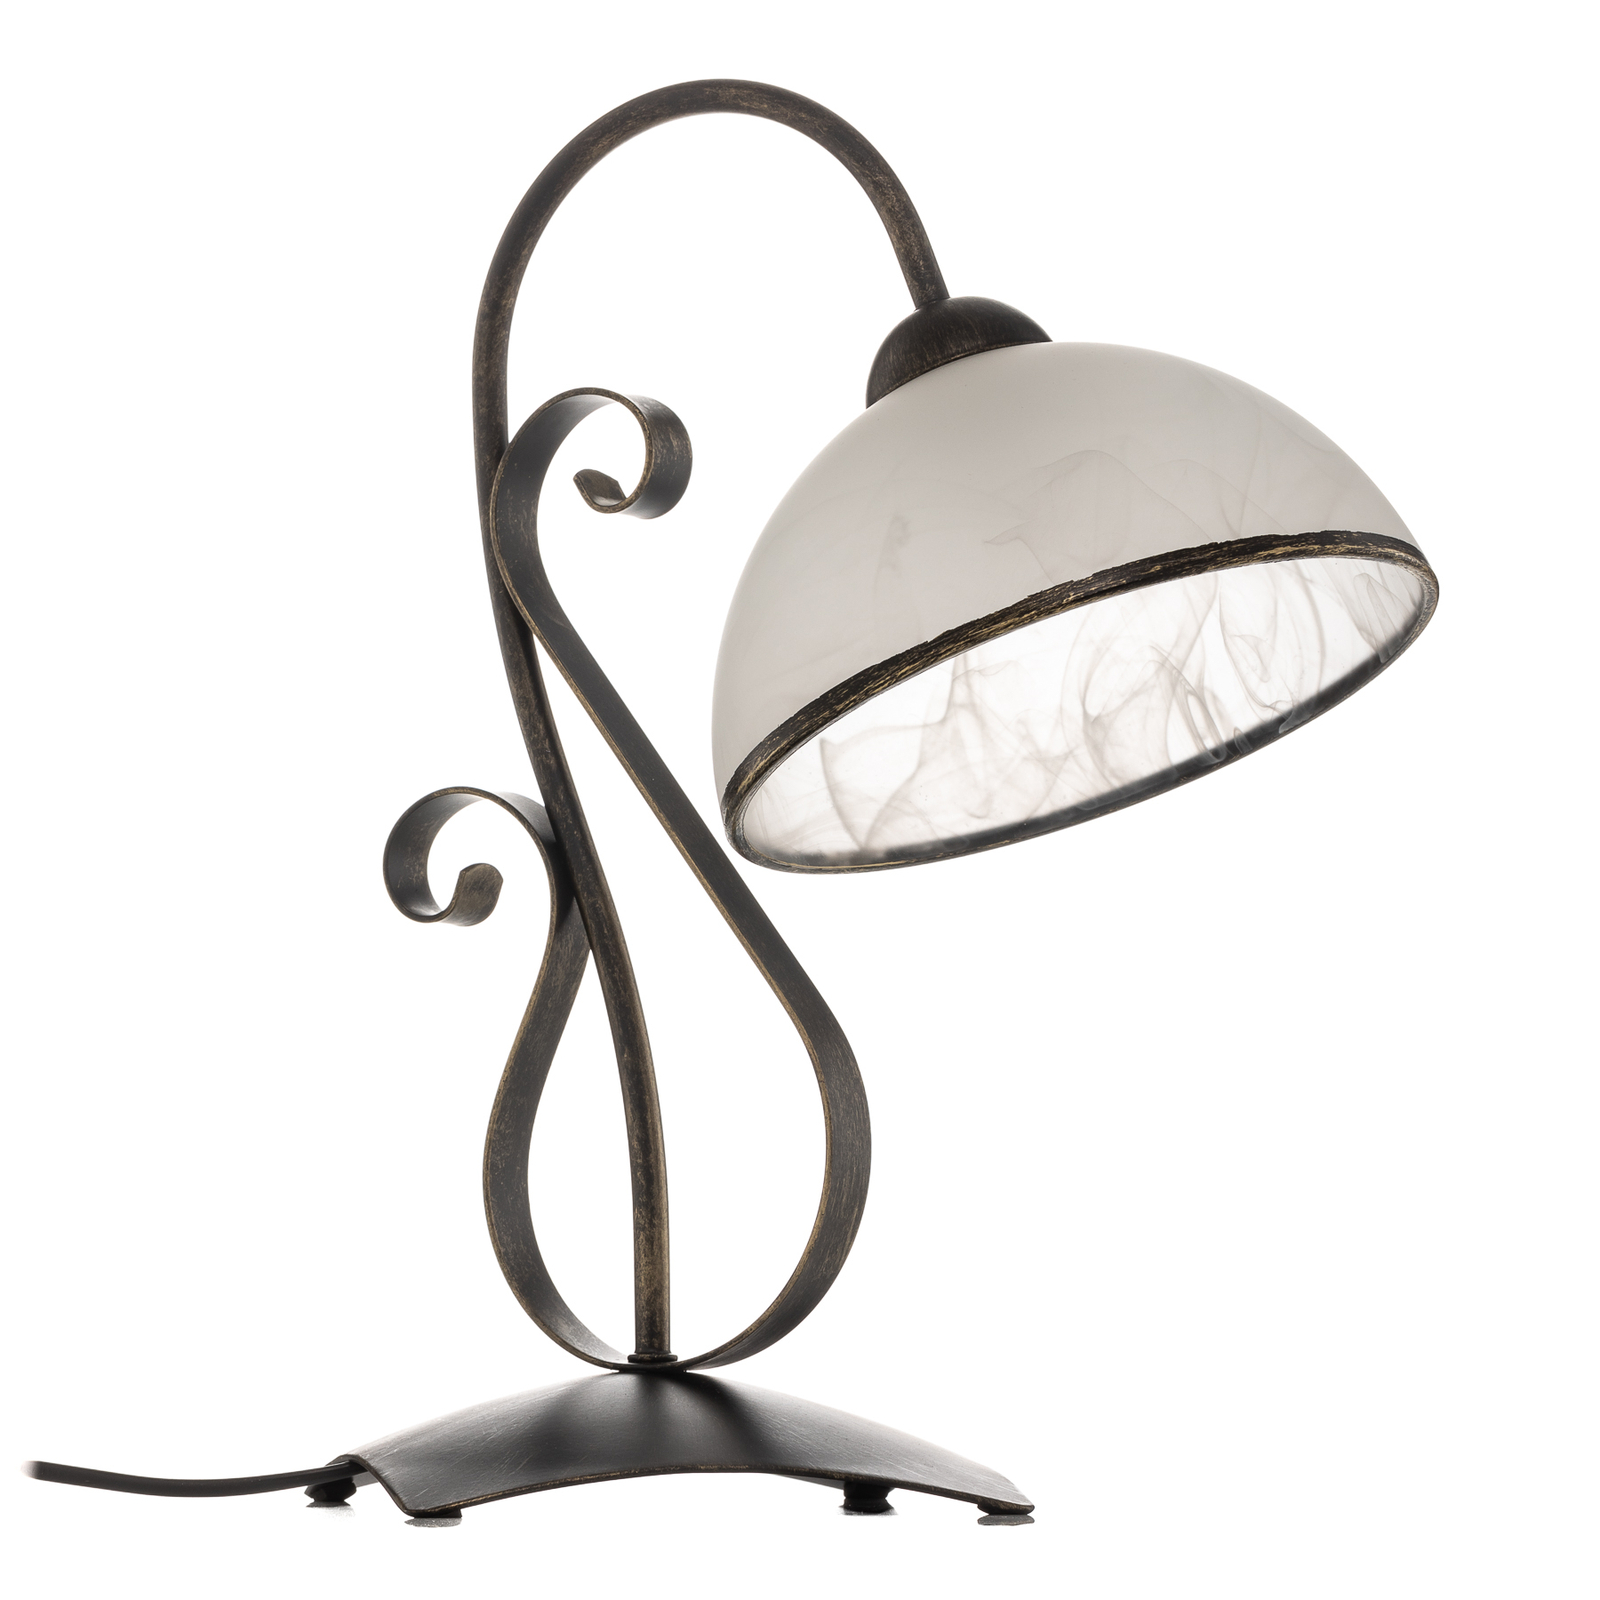 Antica table lamp in country house style, 1-bulb